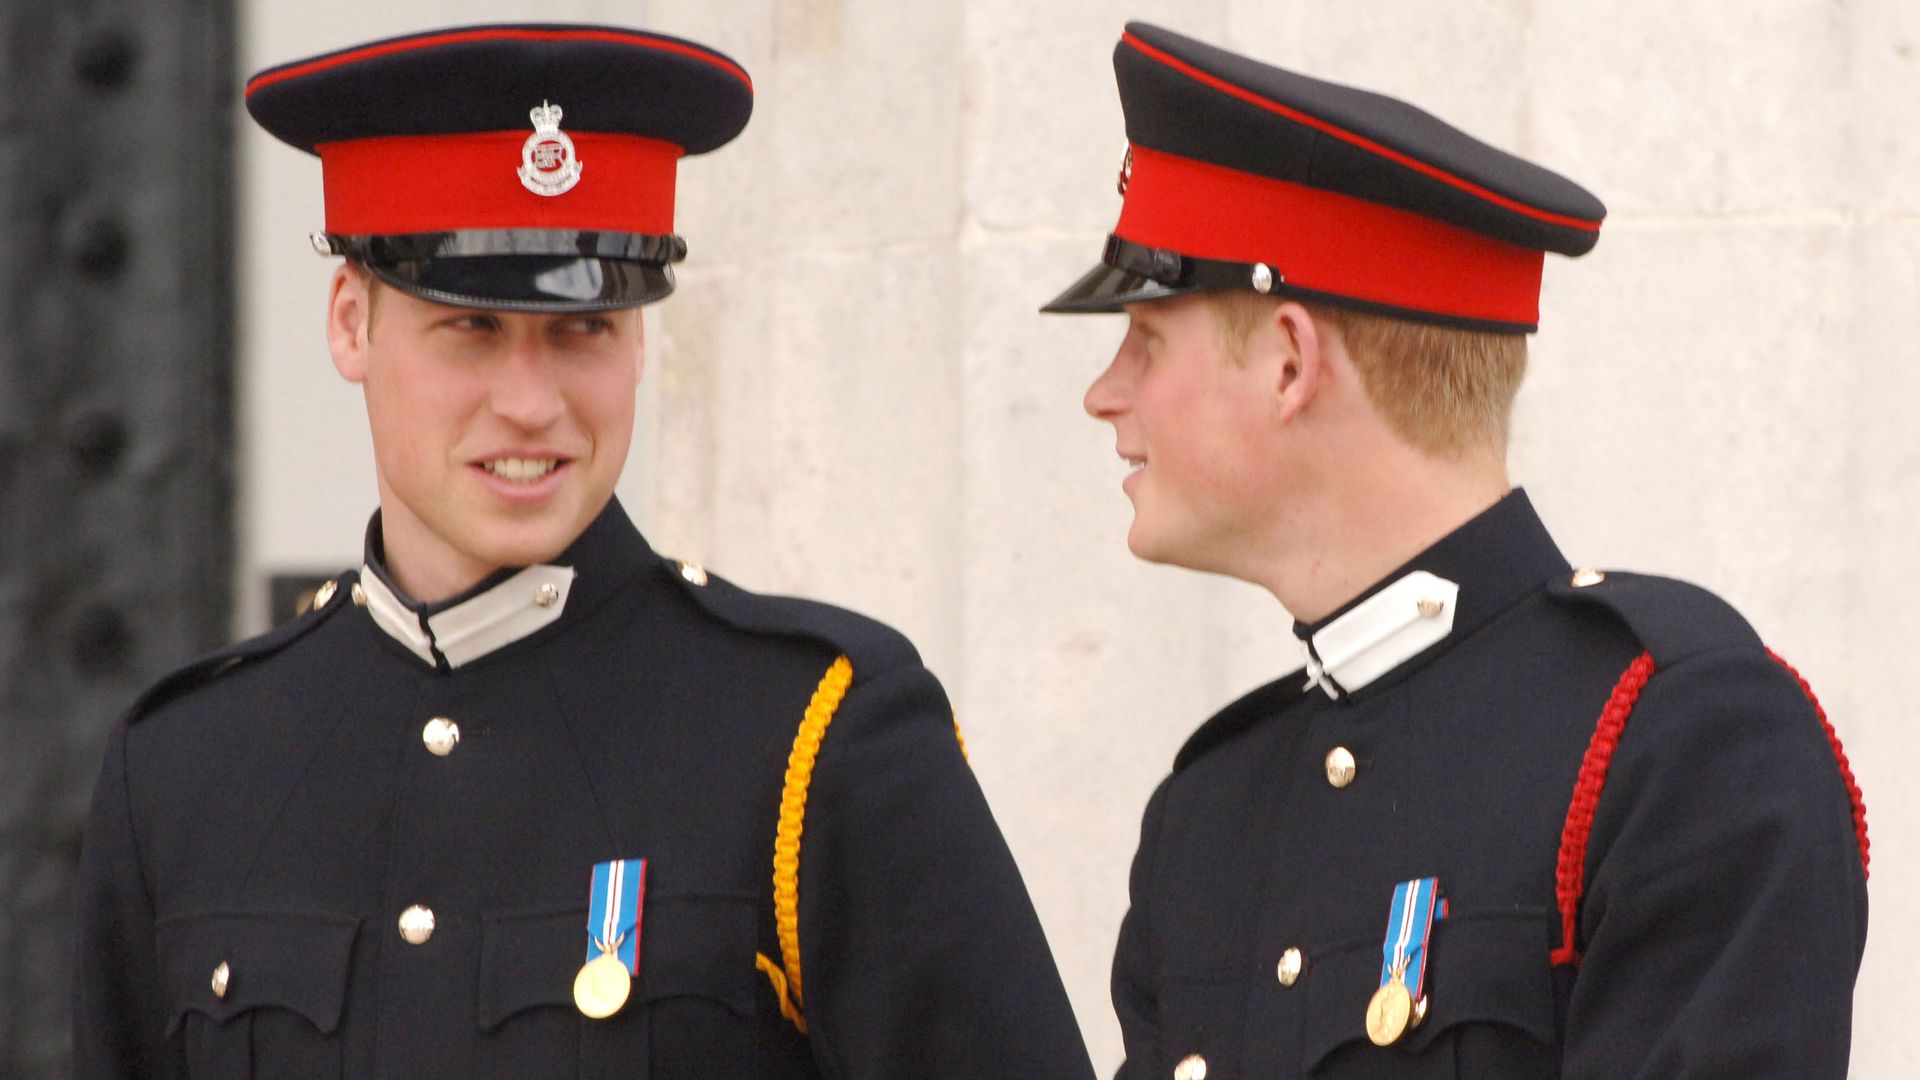 Prince William smiling at Prince Harry in military uniform